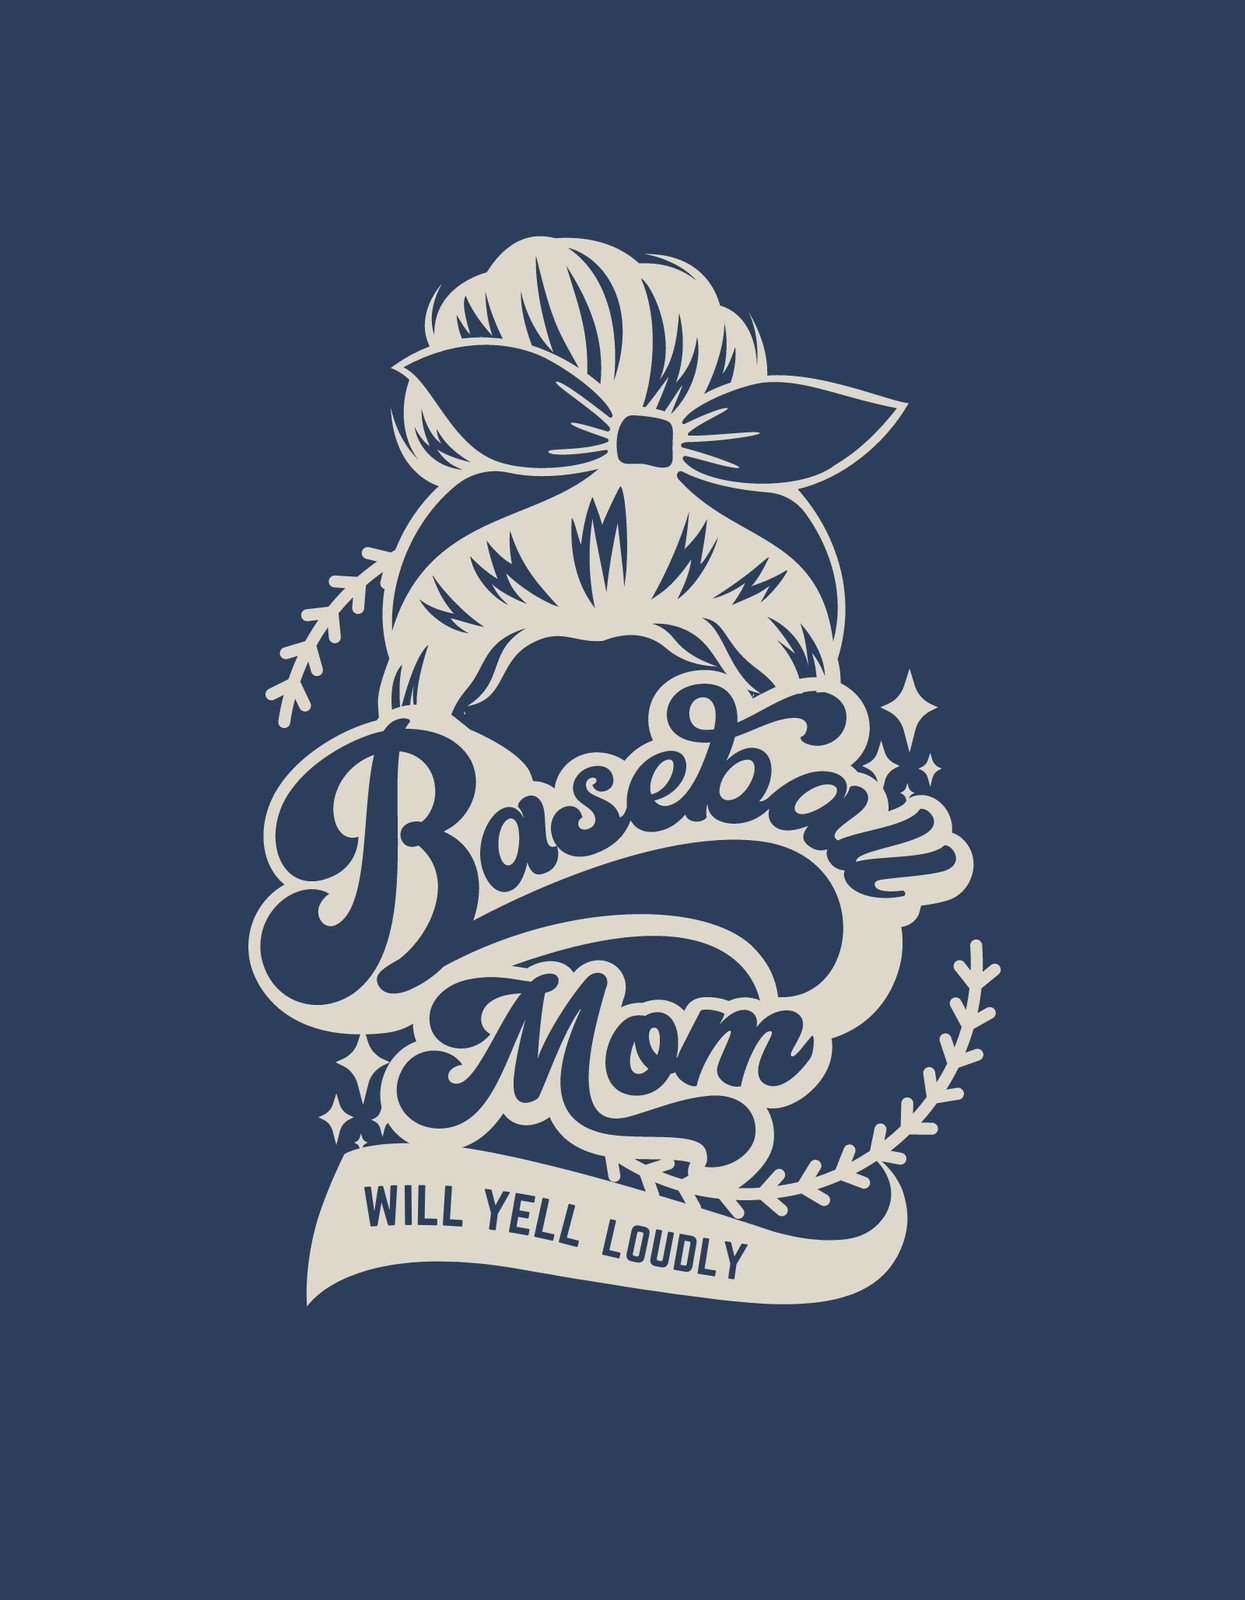 All Star Baseball Mom T-Shirts for Sale